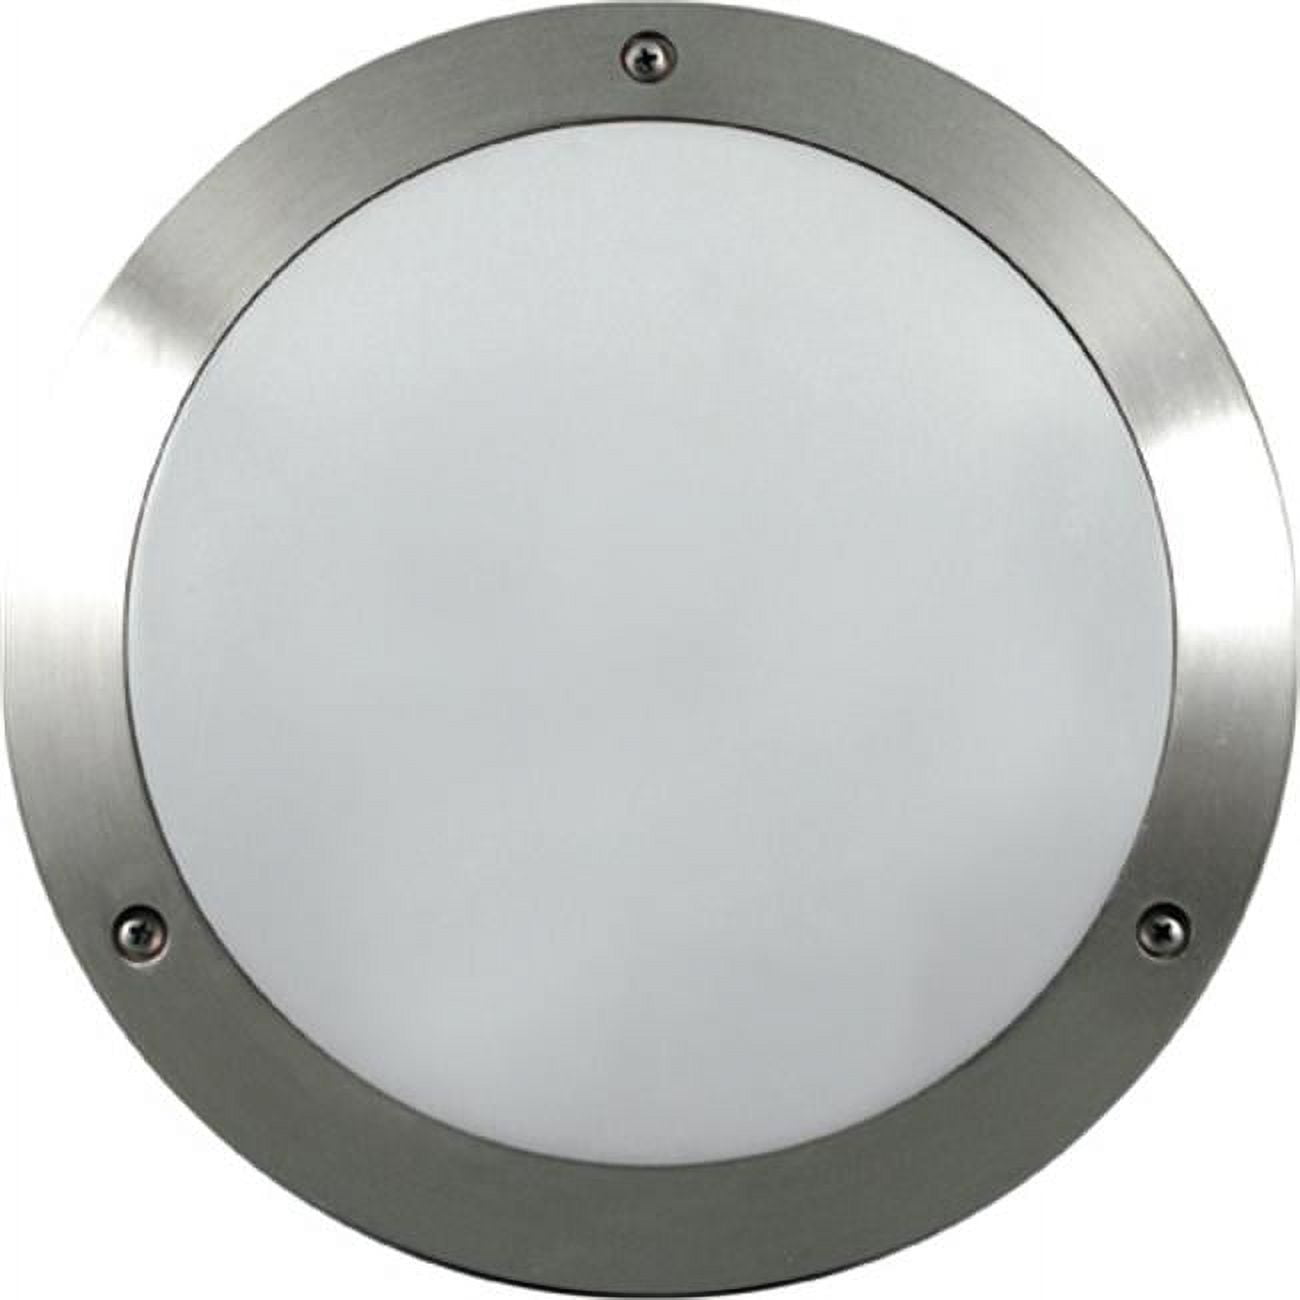 Picture of Dabmar Lighting W3986-SS 10.50 x 10.50 x 2.75 in. 120 V 26 watts Powder Coated Cast Aluminum Surface Mounted Wall Fixture Light with S26-GU-24 Flourescent Lamp, Stainless Steel